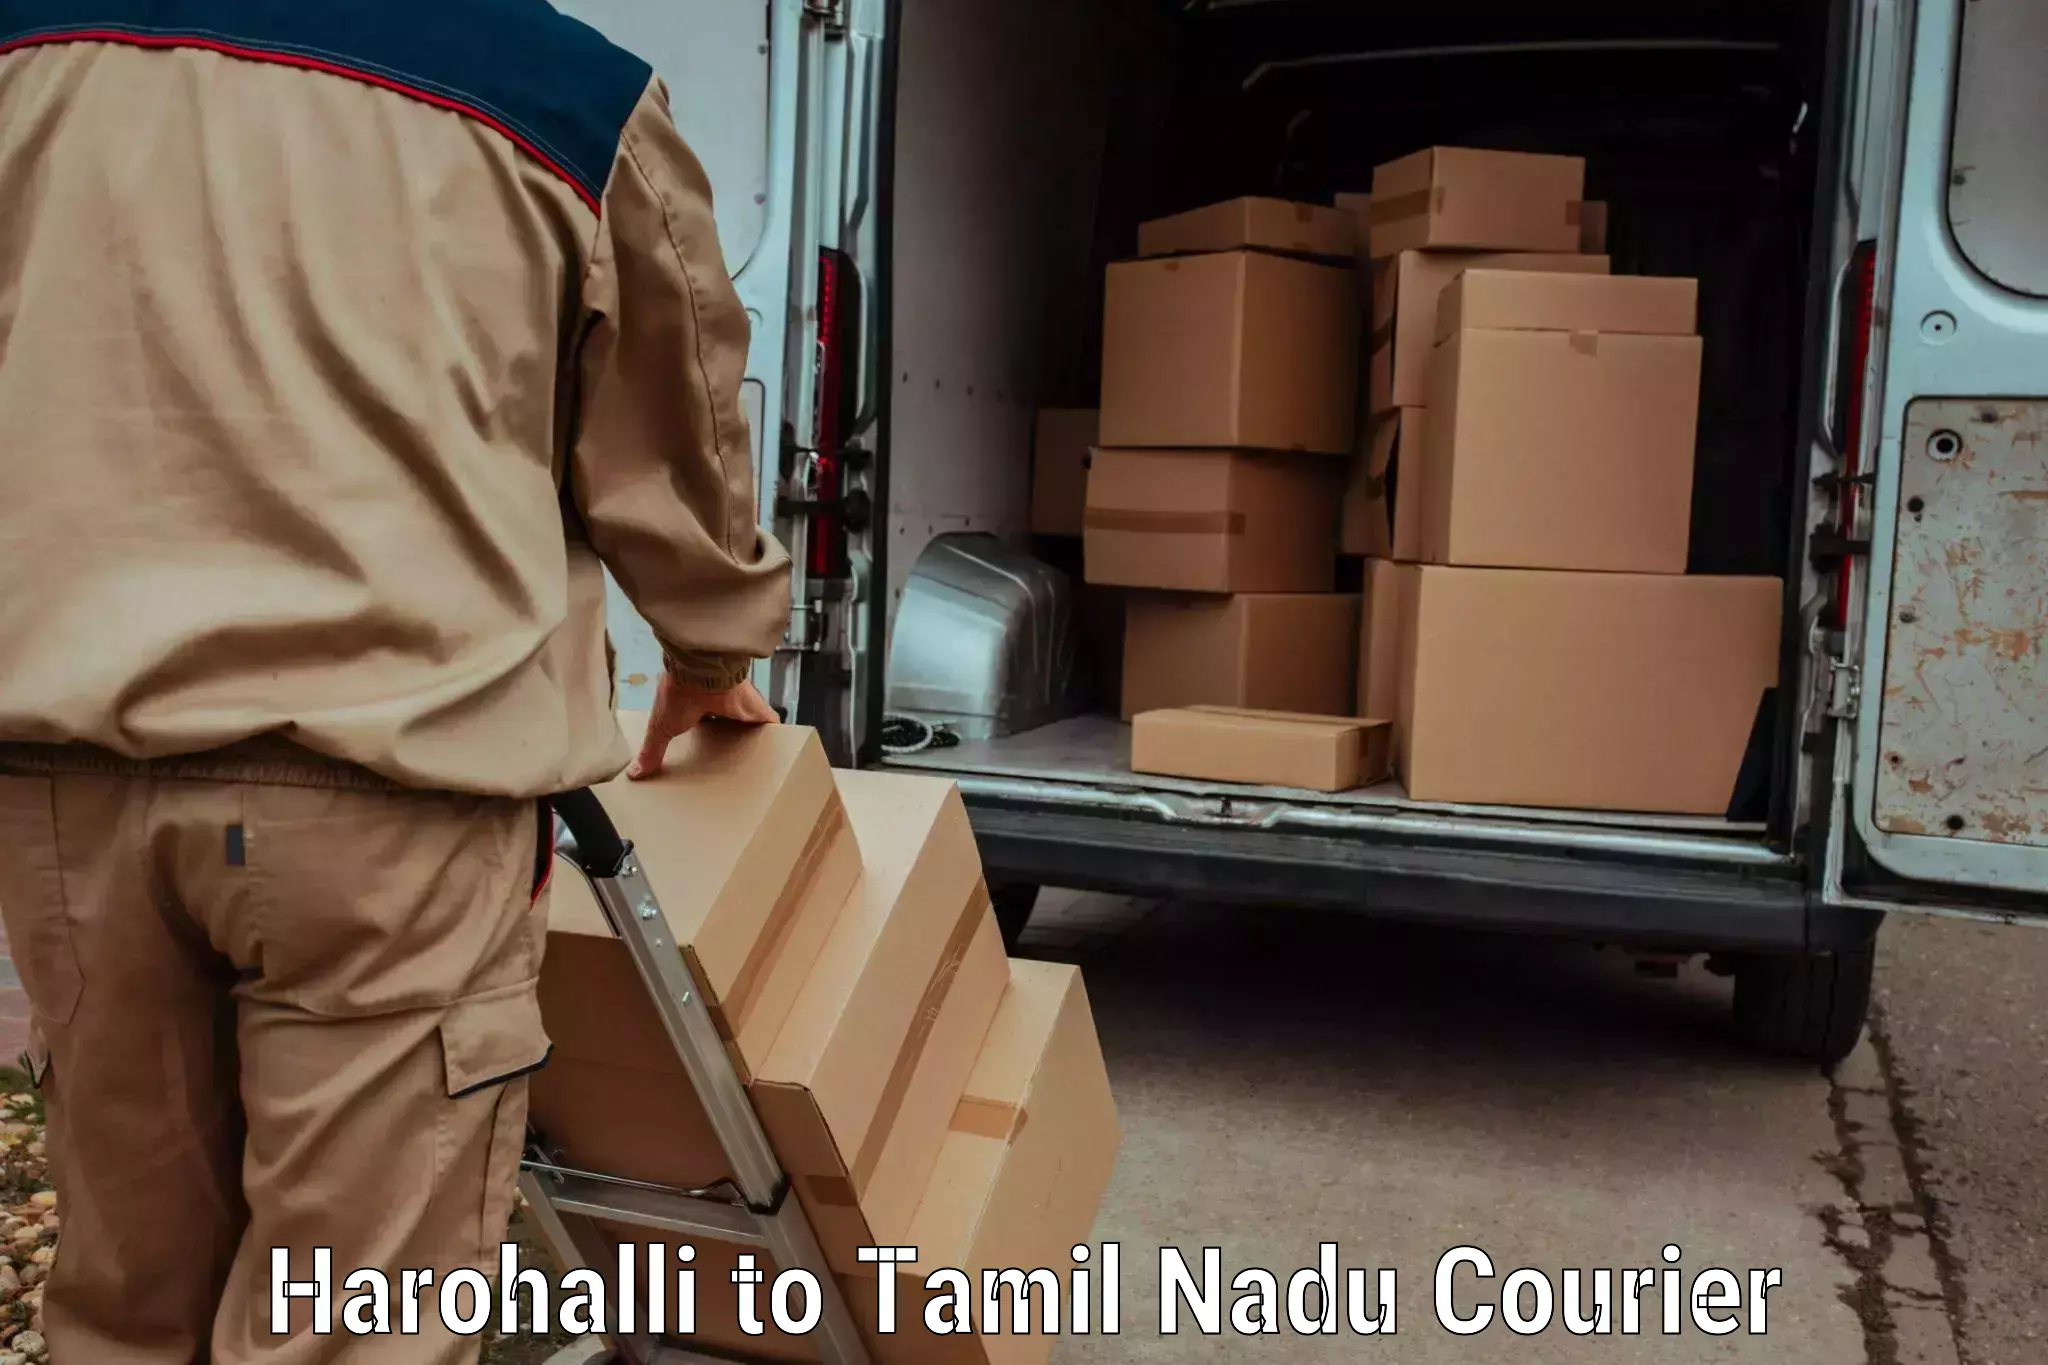 Next day courier Harohalli to Gingee